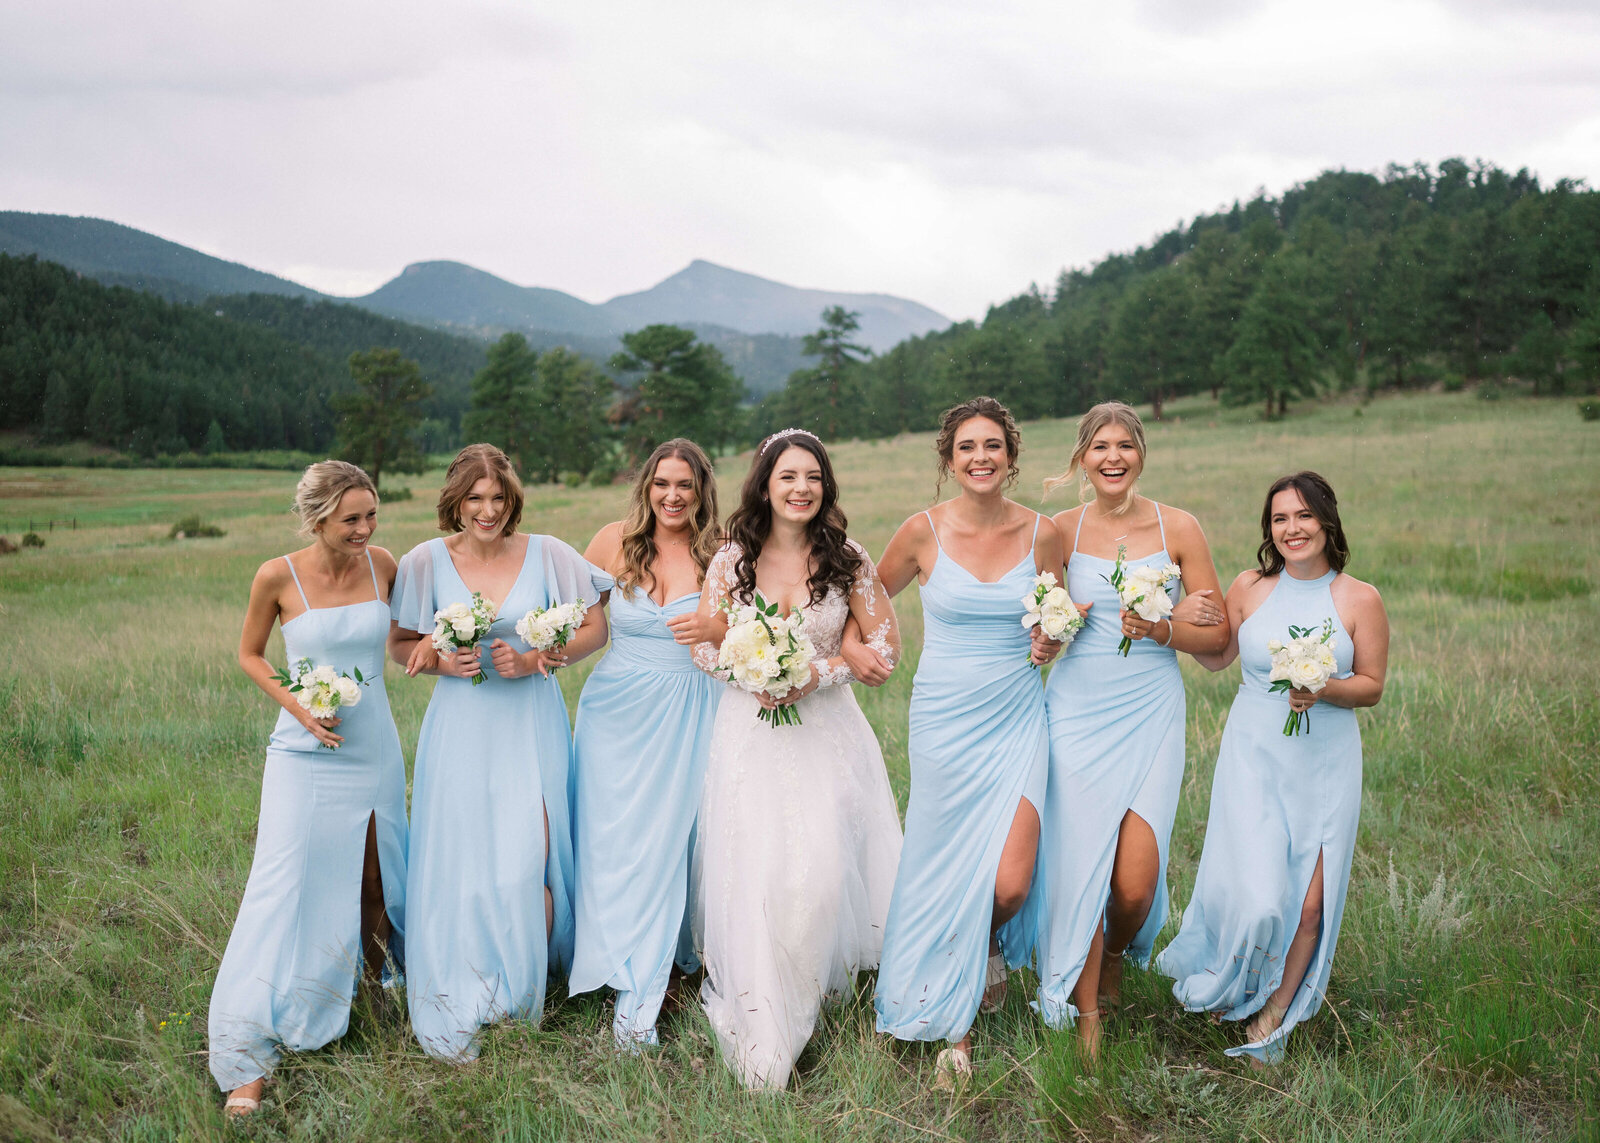 bridal party dressed in light blue bridesmaids dresses walk in a field with their friend and bride